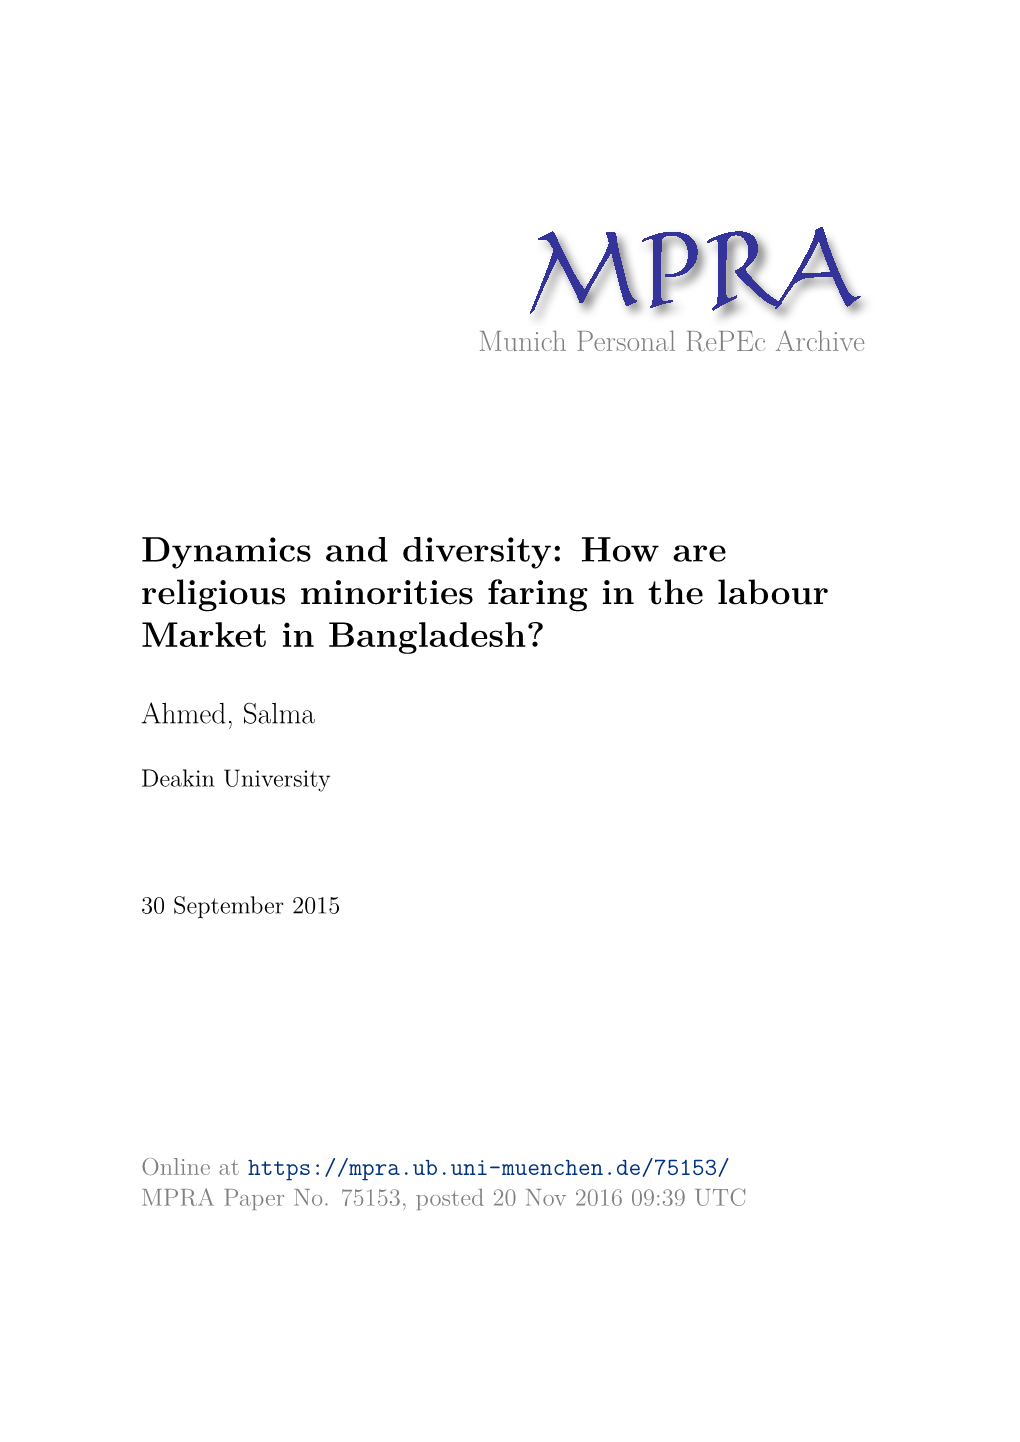 How Are Religious Minorities Faring in the Labour Market in Bangladesh?